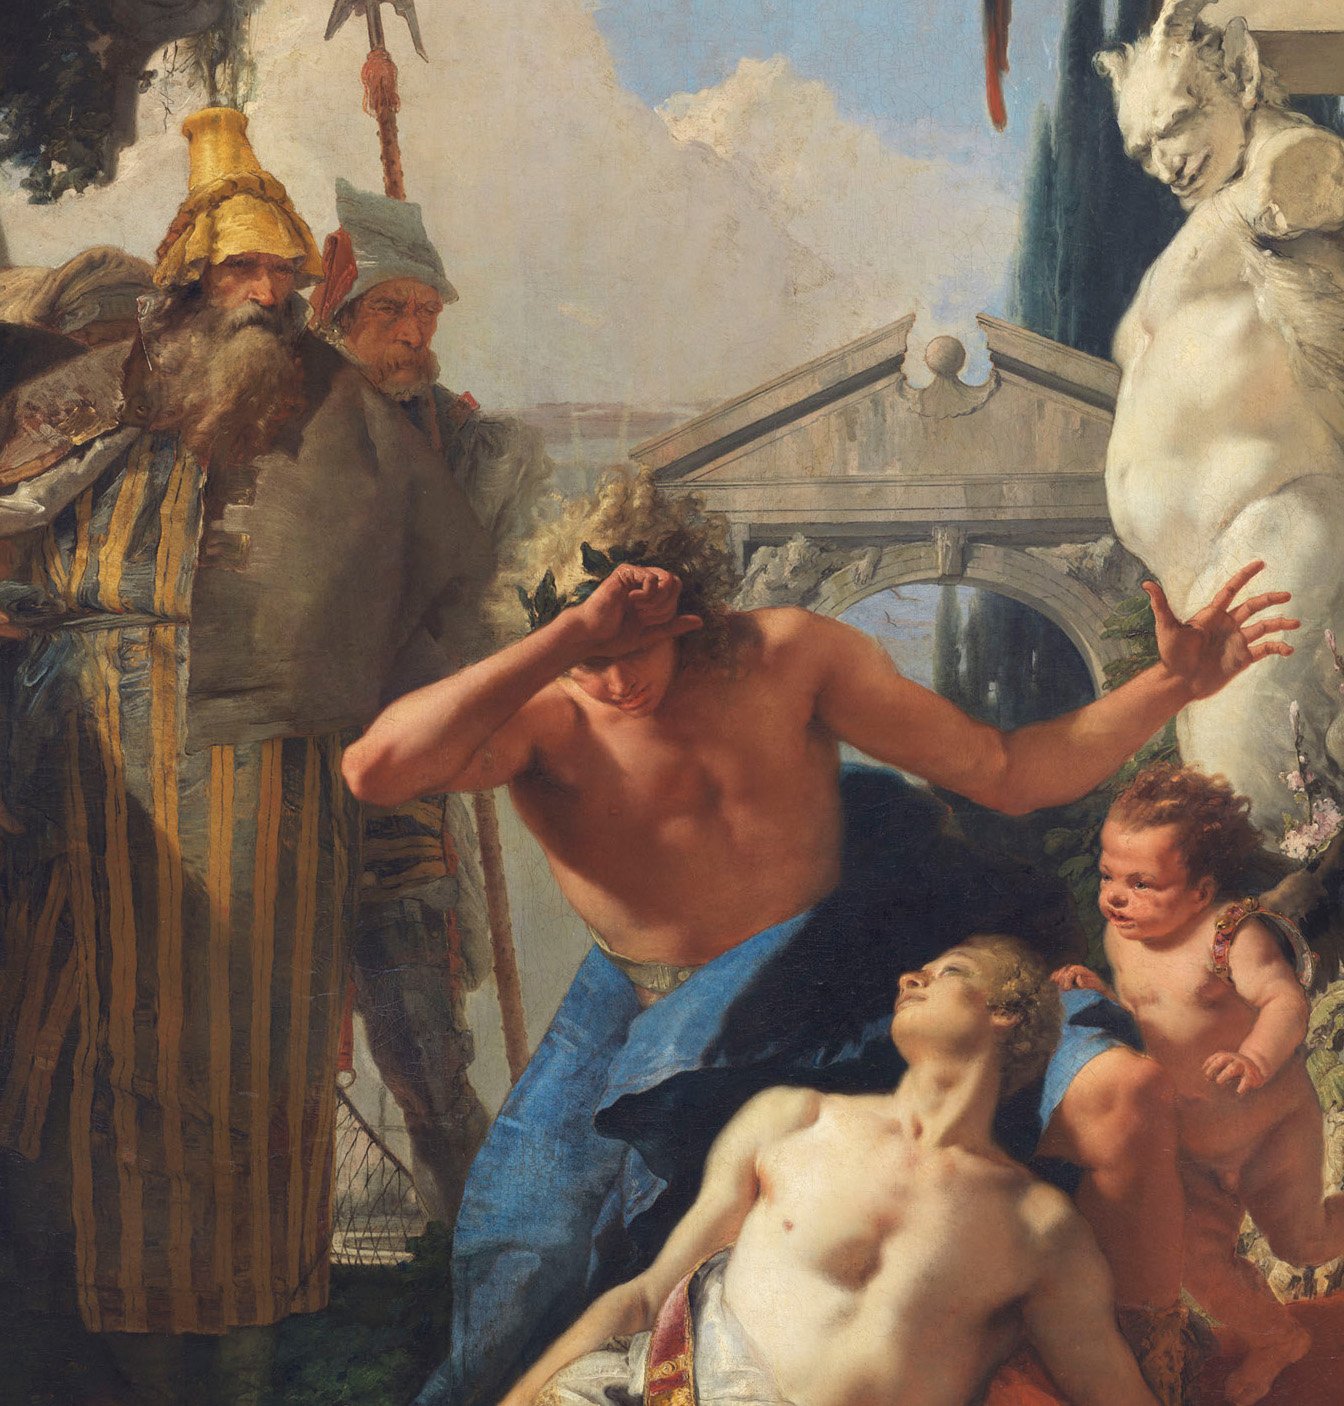 Detail of the painting "The Death of Hyacinthus" by Giambattista Tiepolo, after its restoration